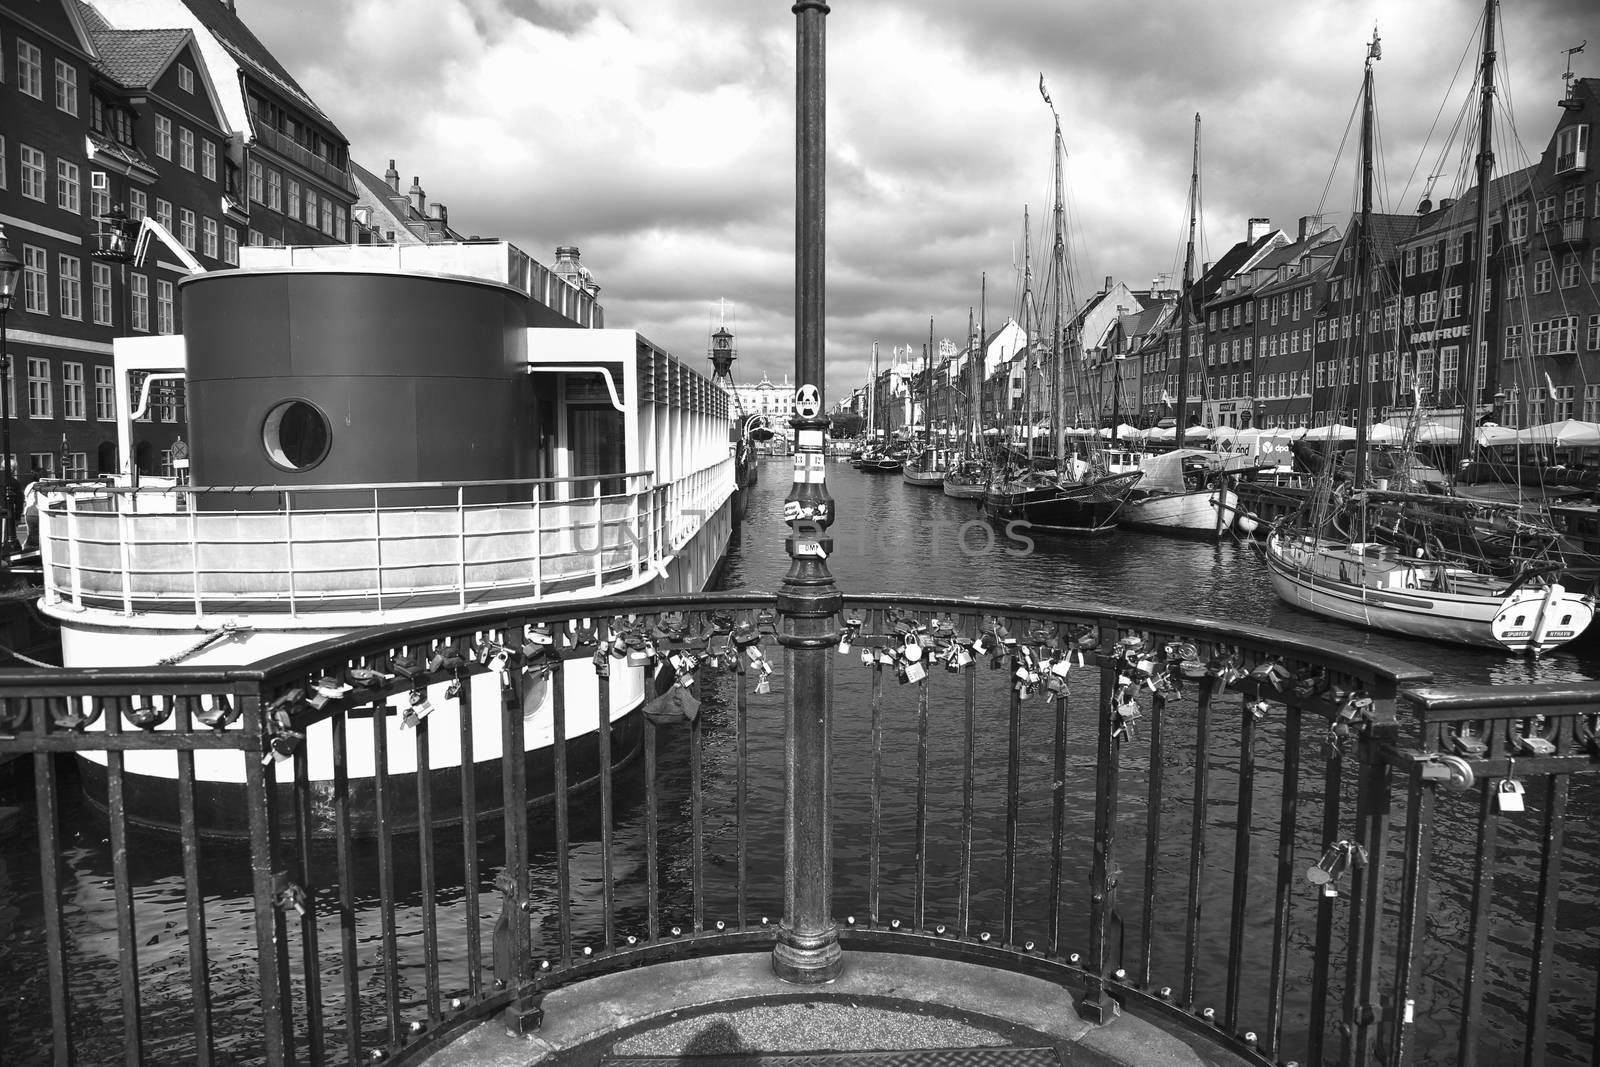 COPENHAGEN, DENMARK - AUGUST 15, 2016: Black and white photo, boats in the docks Nyhavn, people, and colorful architecture. Nyhavn a 17th century harbour in Copenhagen, Denmark on August 15, 2016.